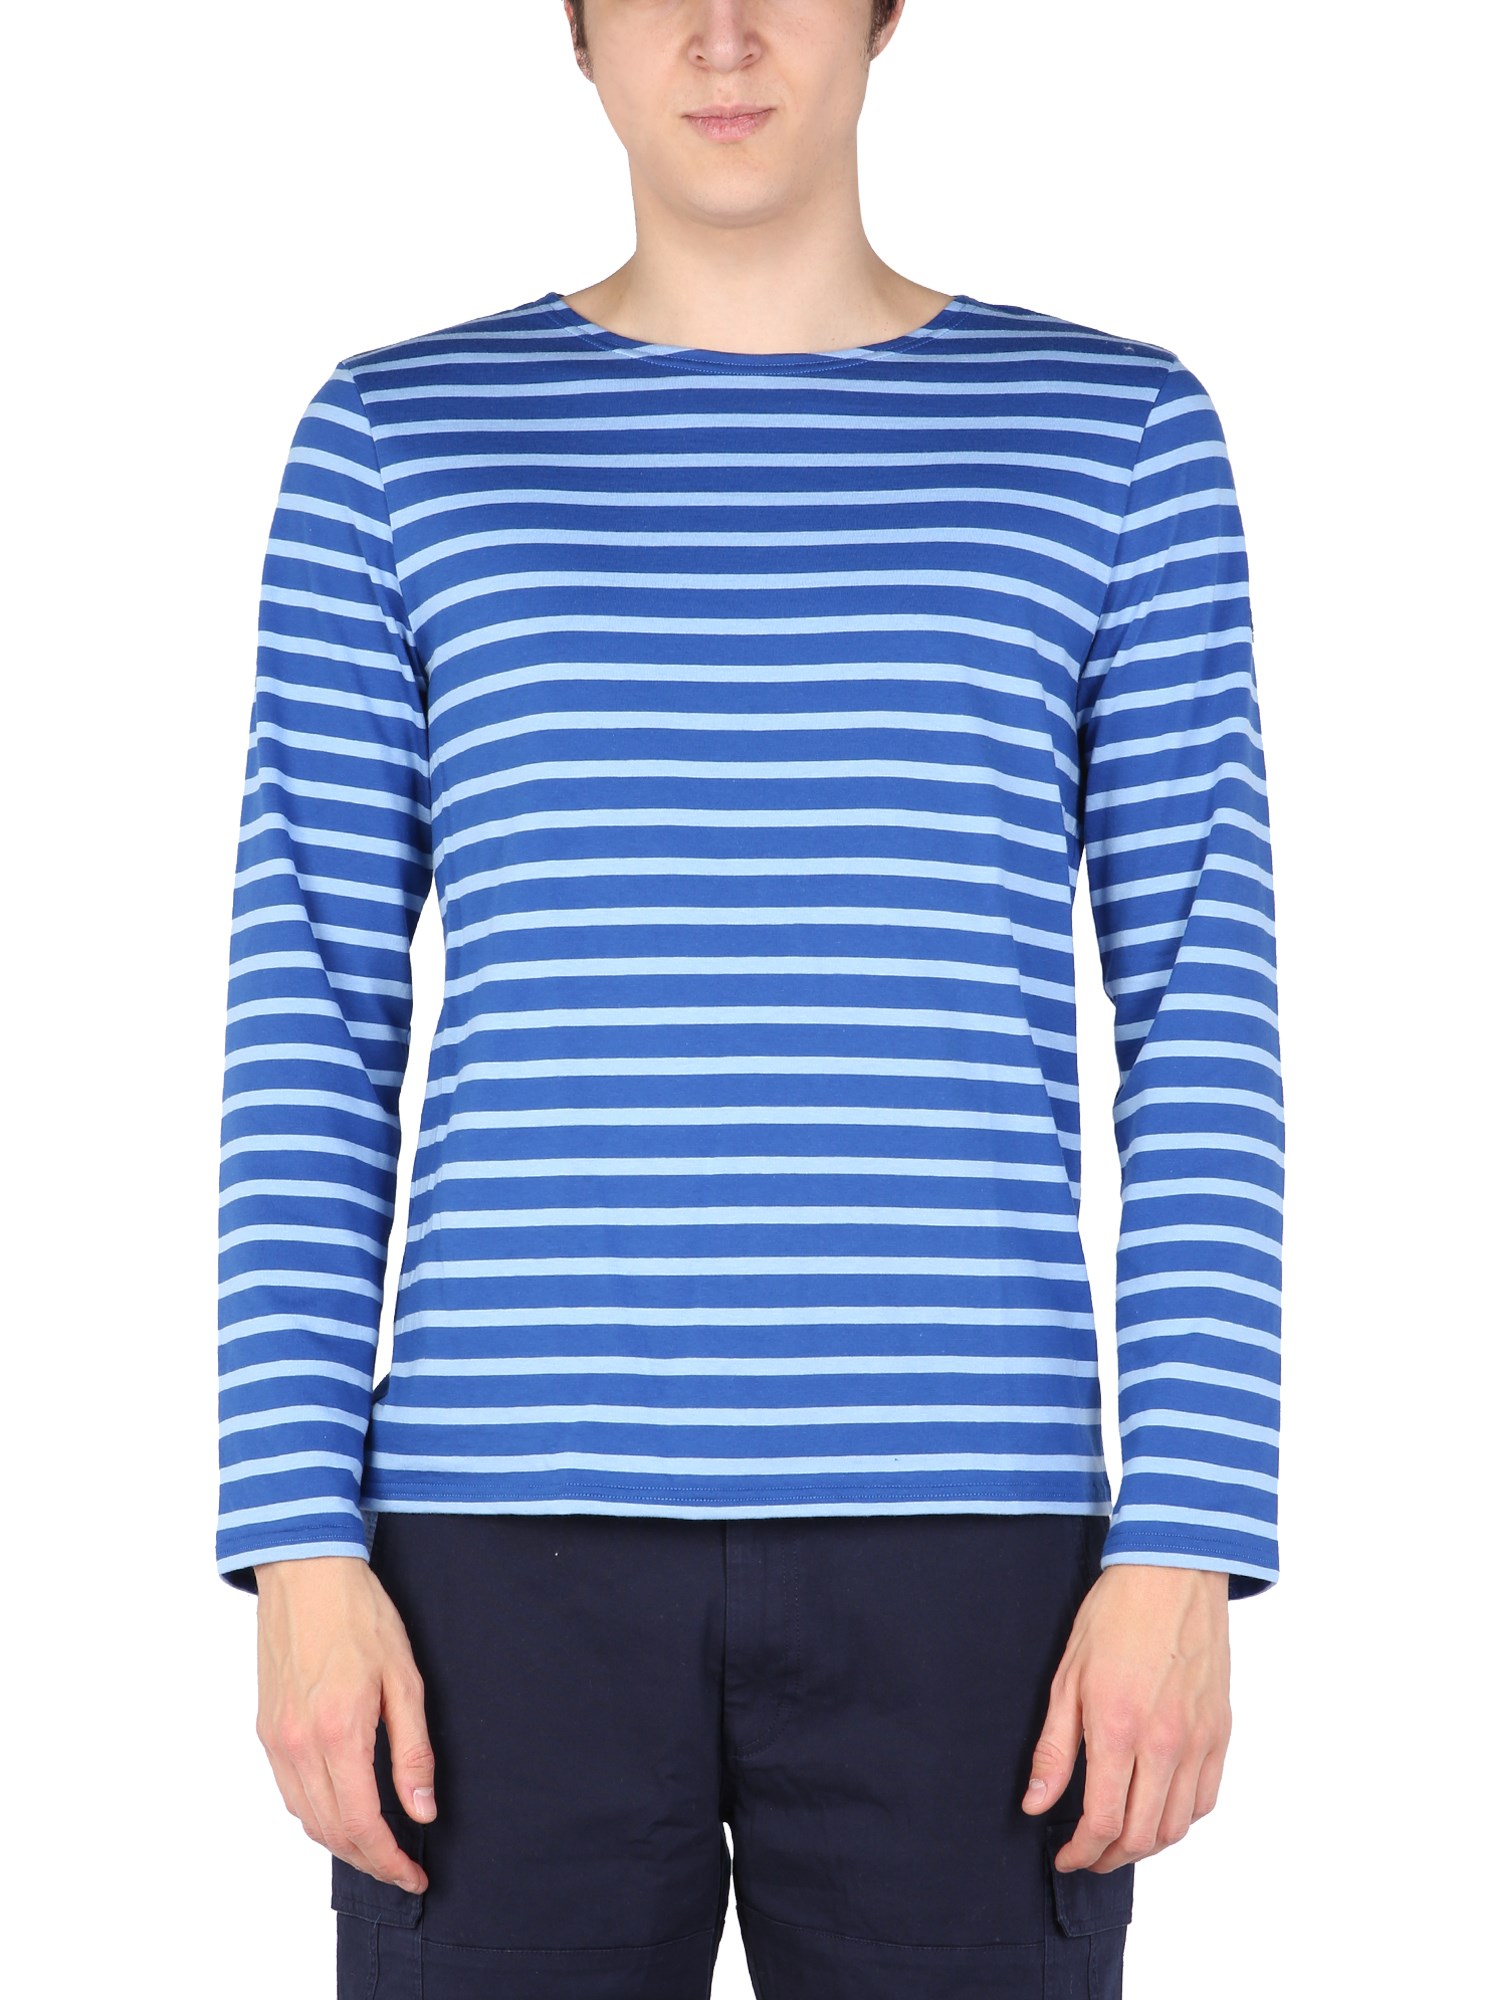 saint james t-shirt with striped pattern